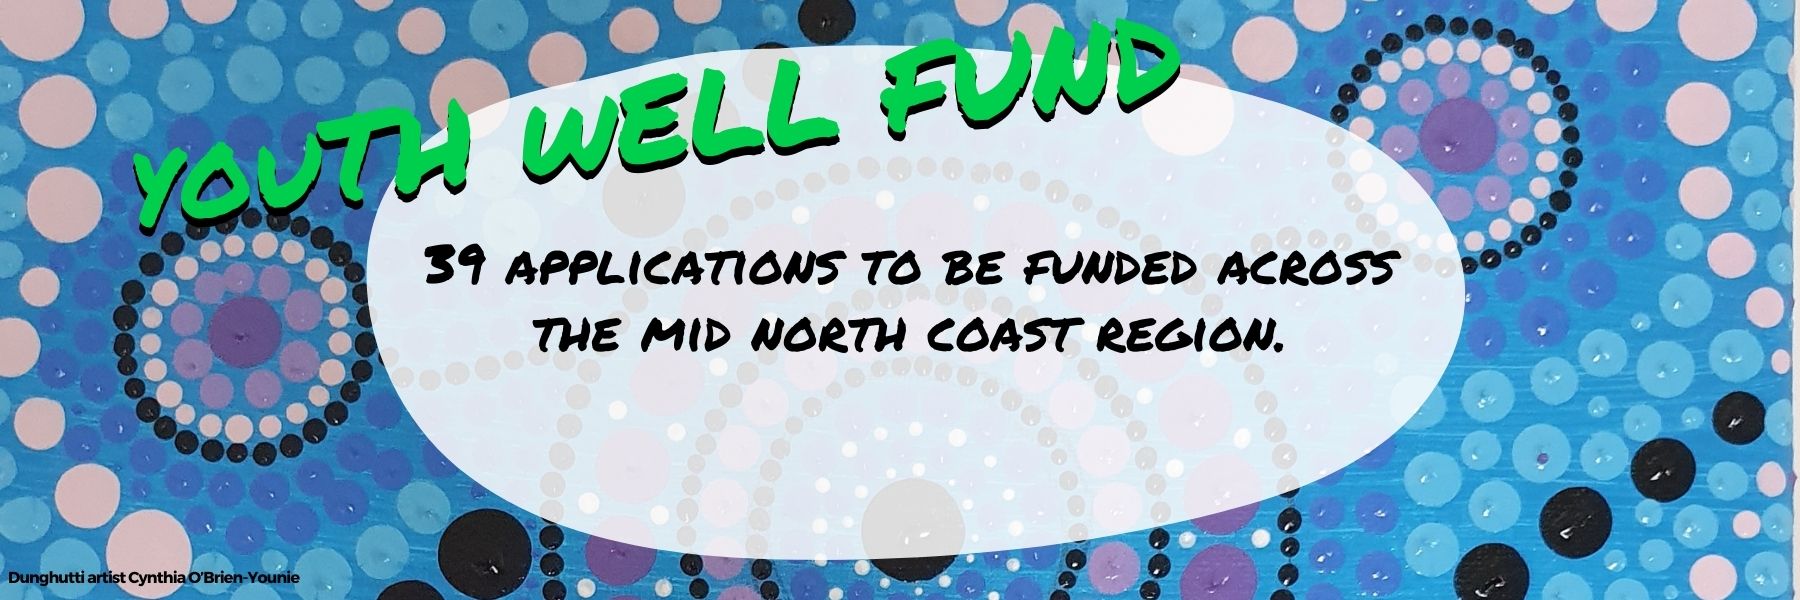 39 applications to be funded